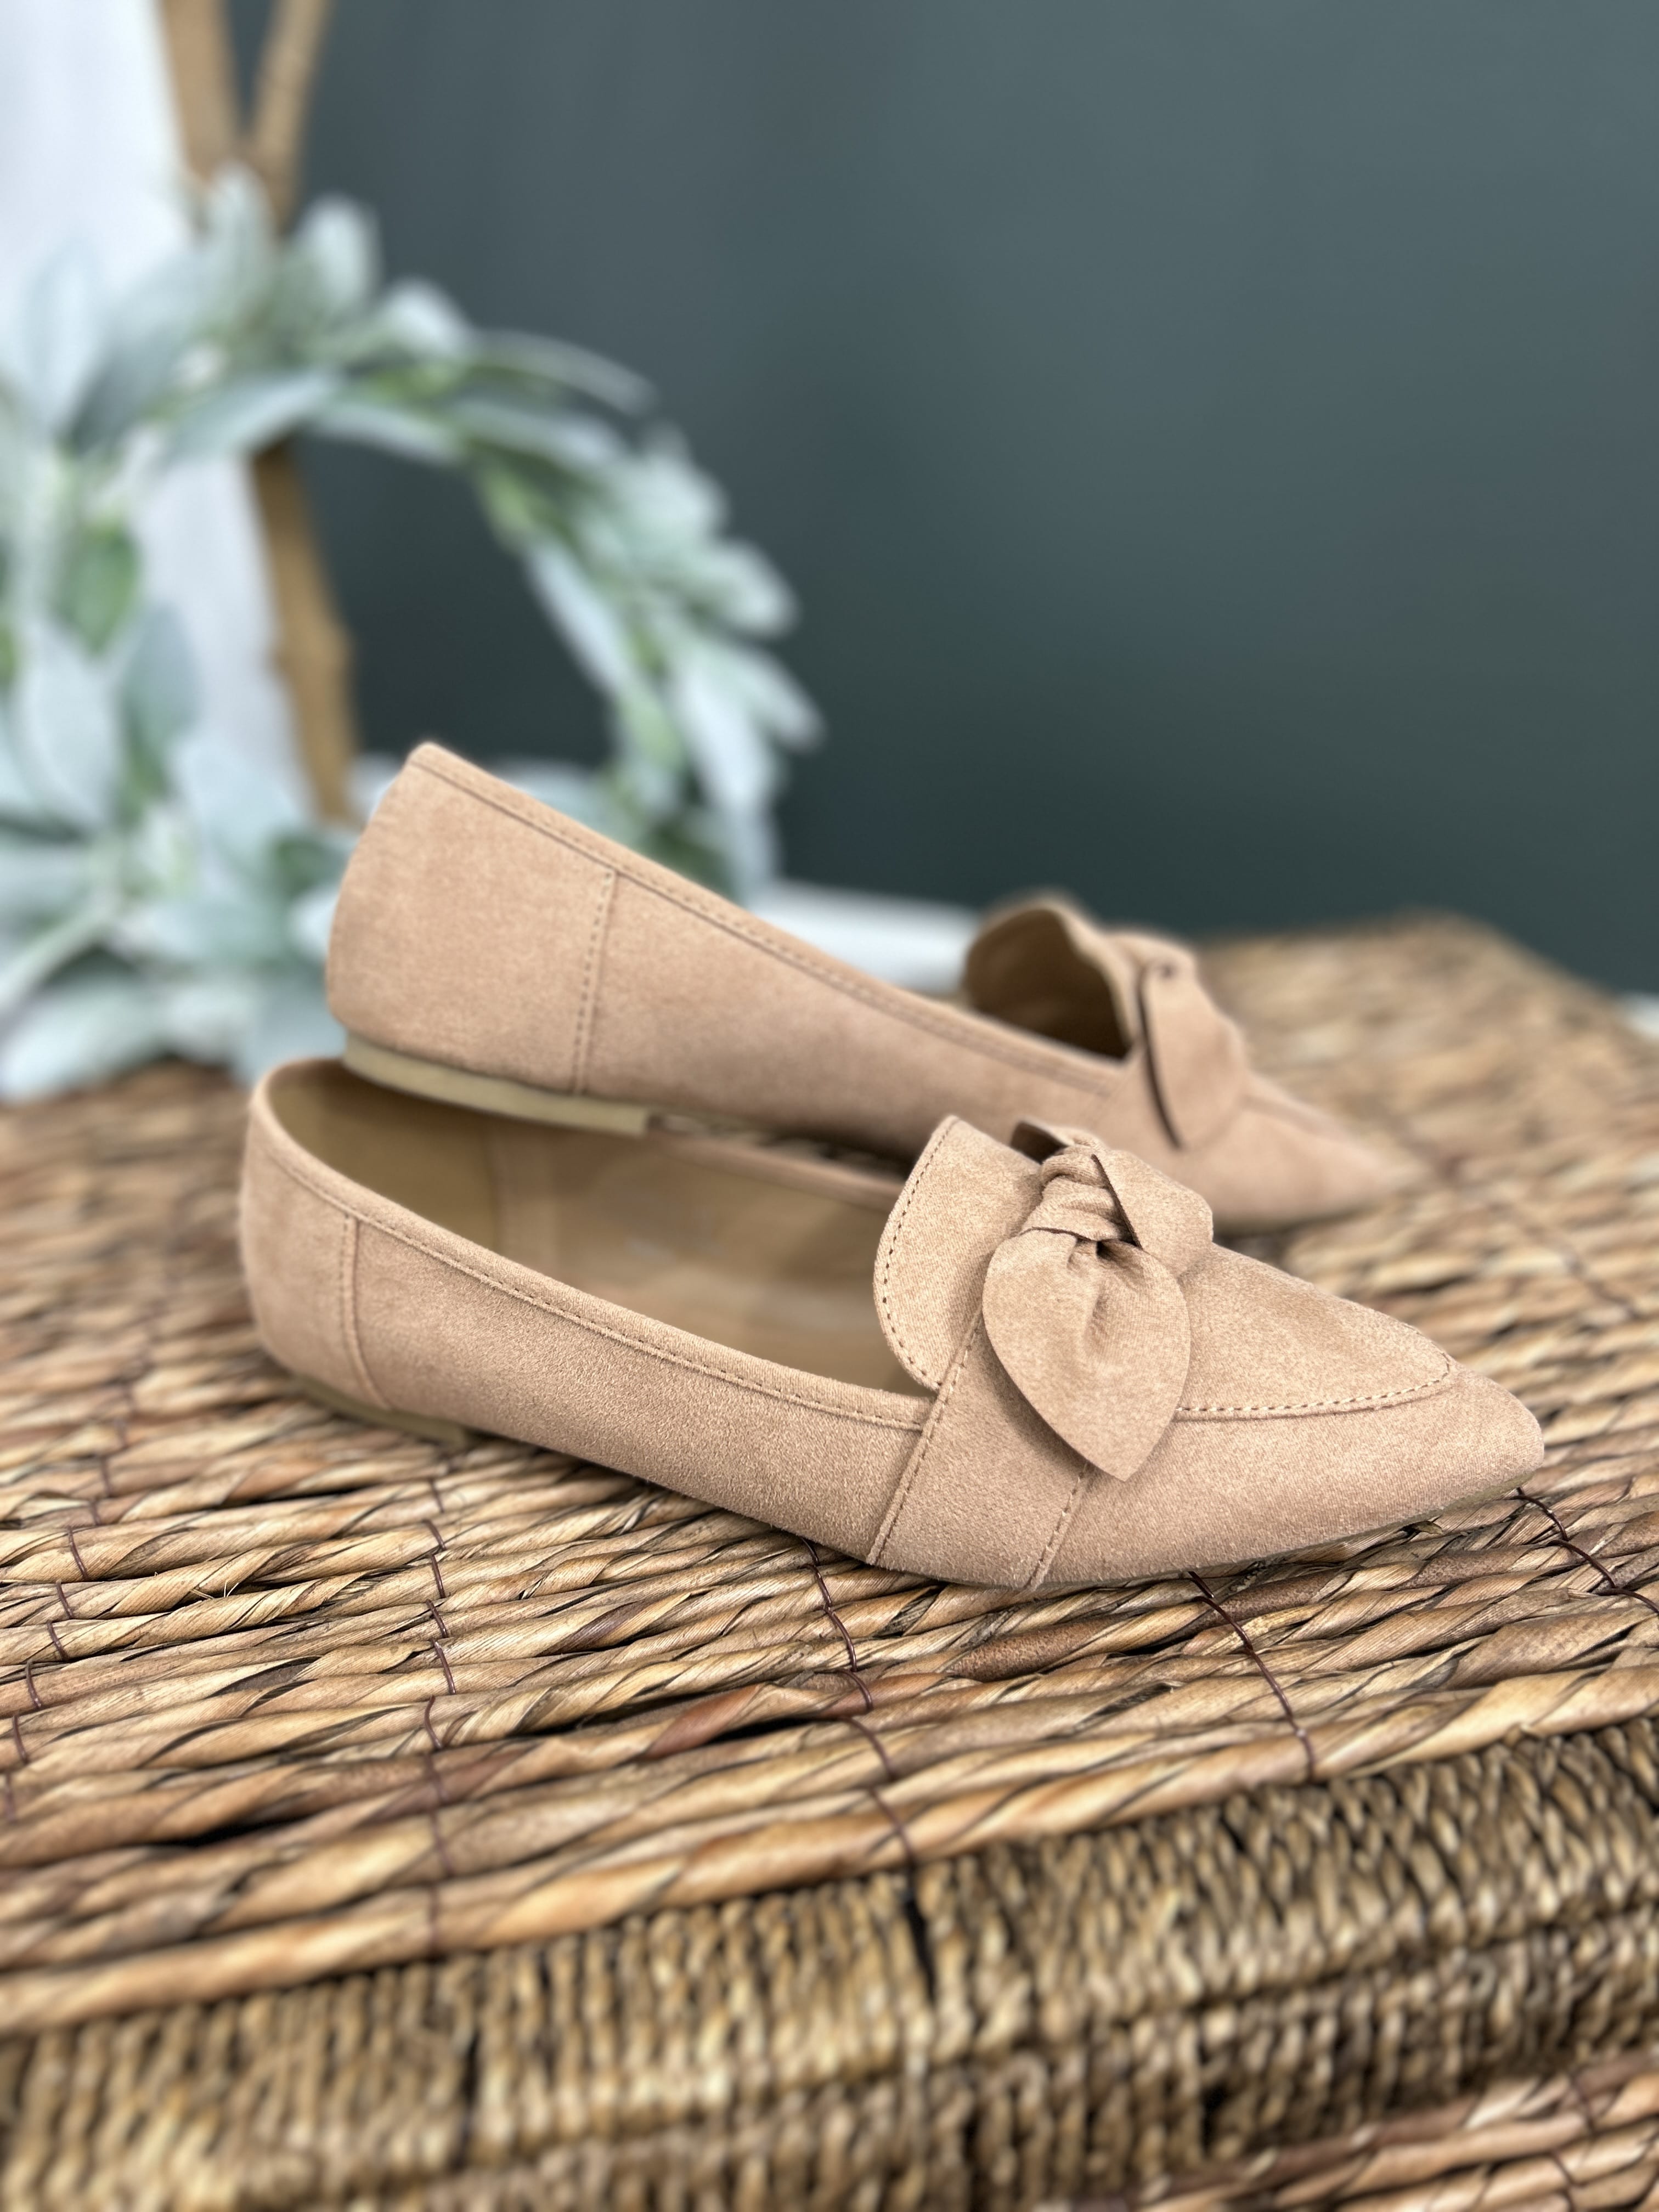 Chic and casual women's camel color flat side view.